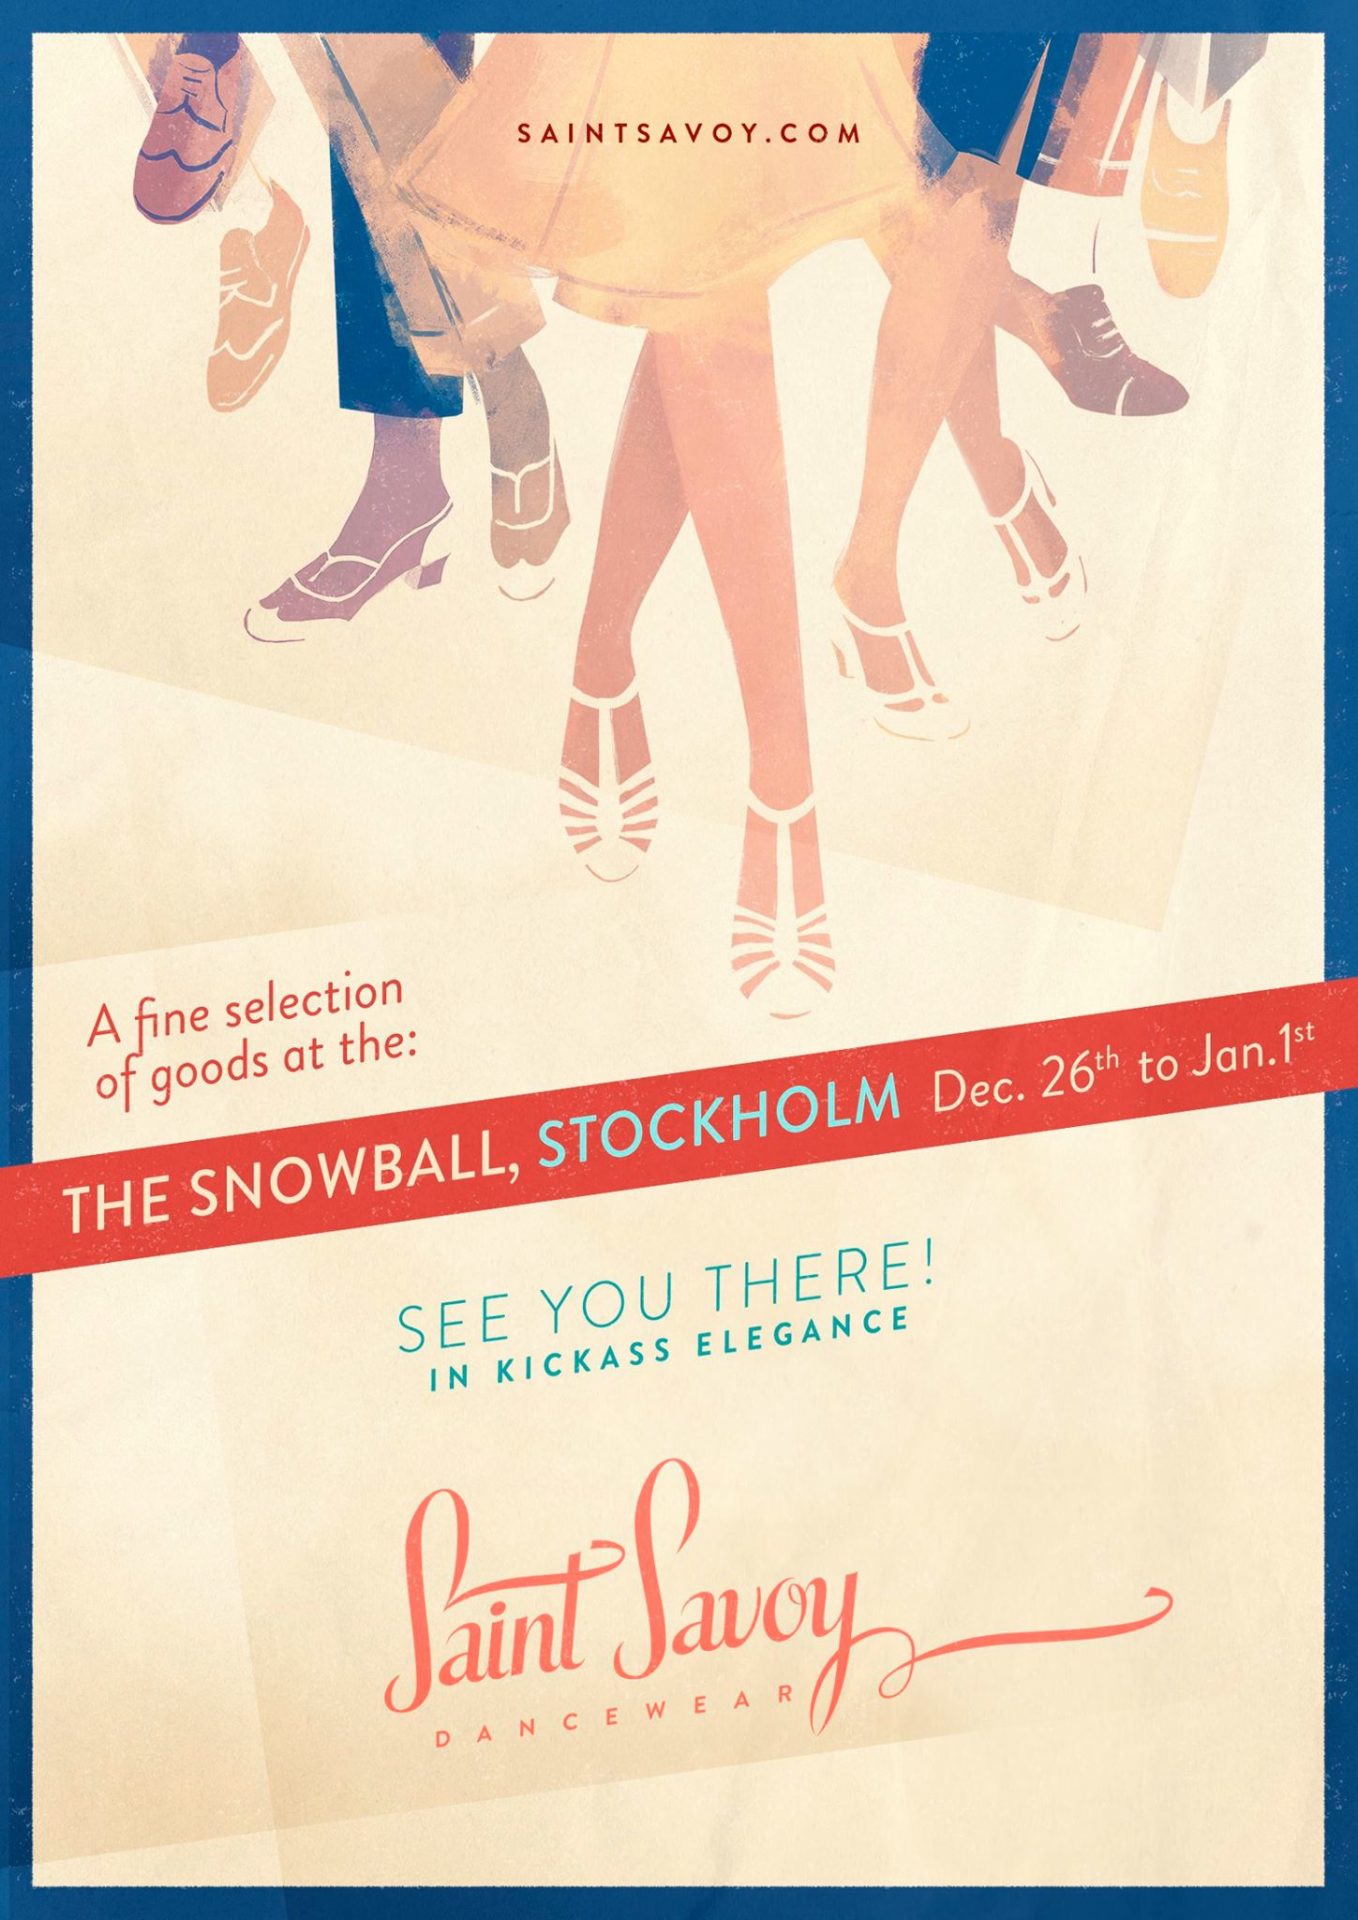 The Snowball Stockholm